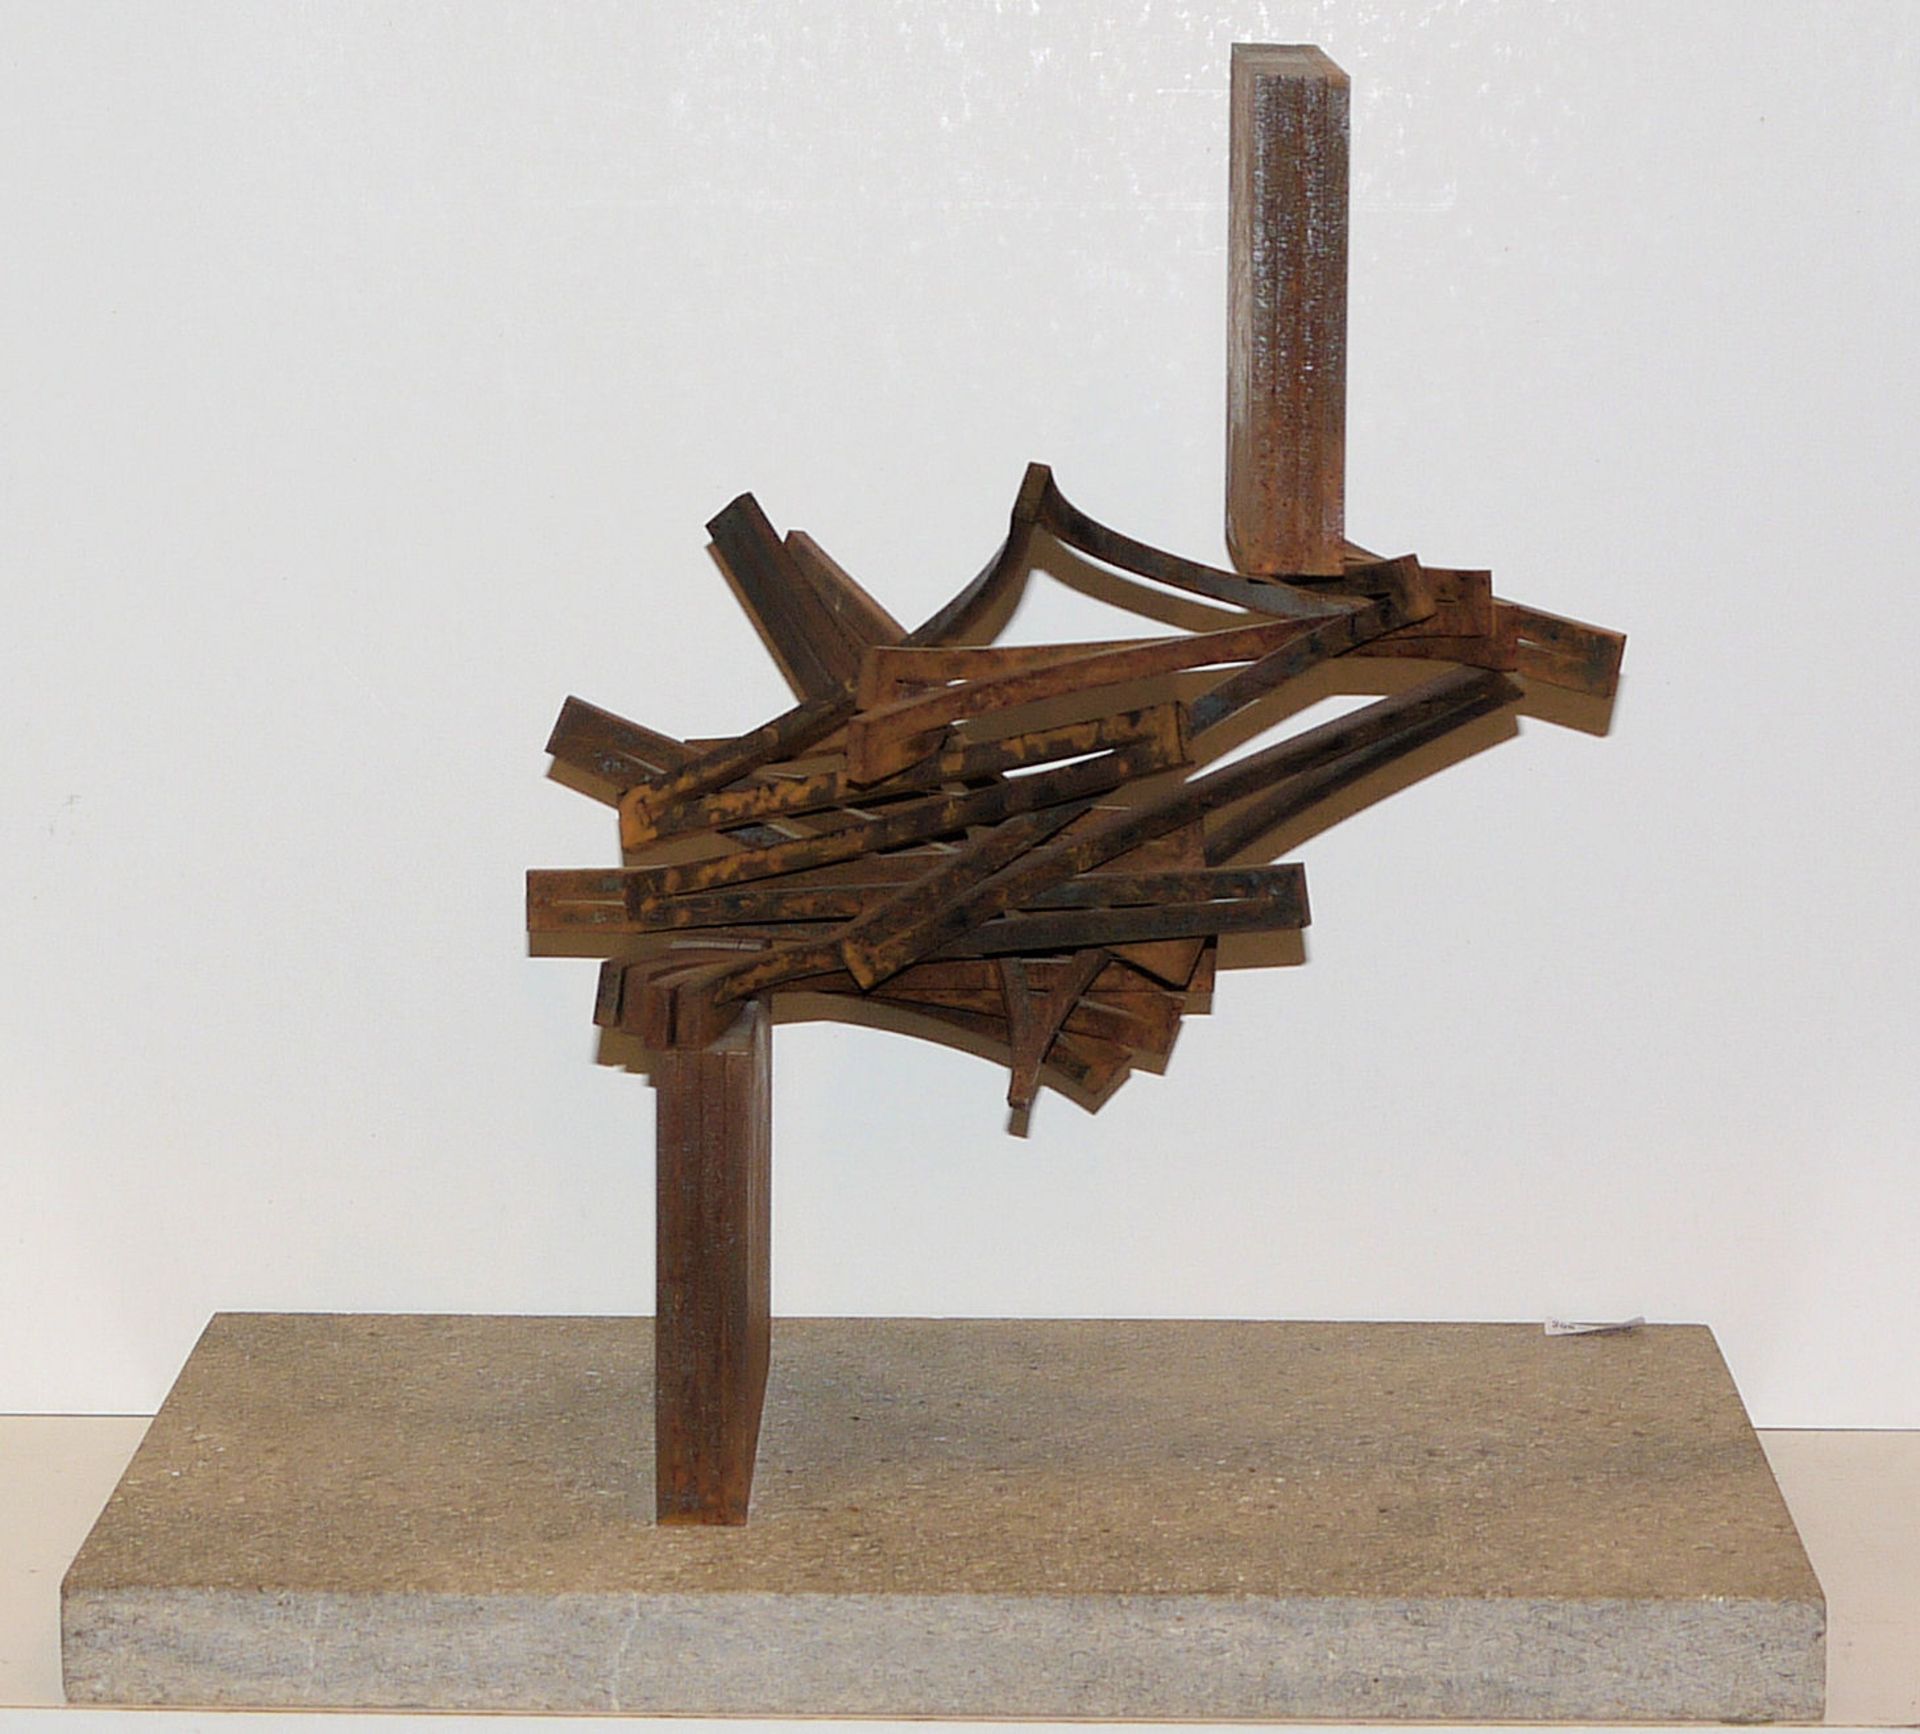 Thomas Röthel, room sculpture, steel with rust patina, with monograph "Thomas Röthel Stahlskulpture - Image 2 of 3